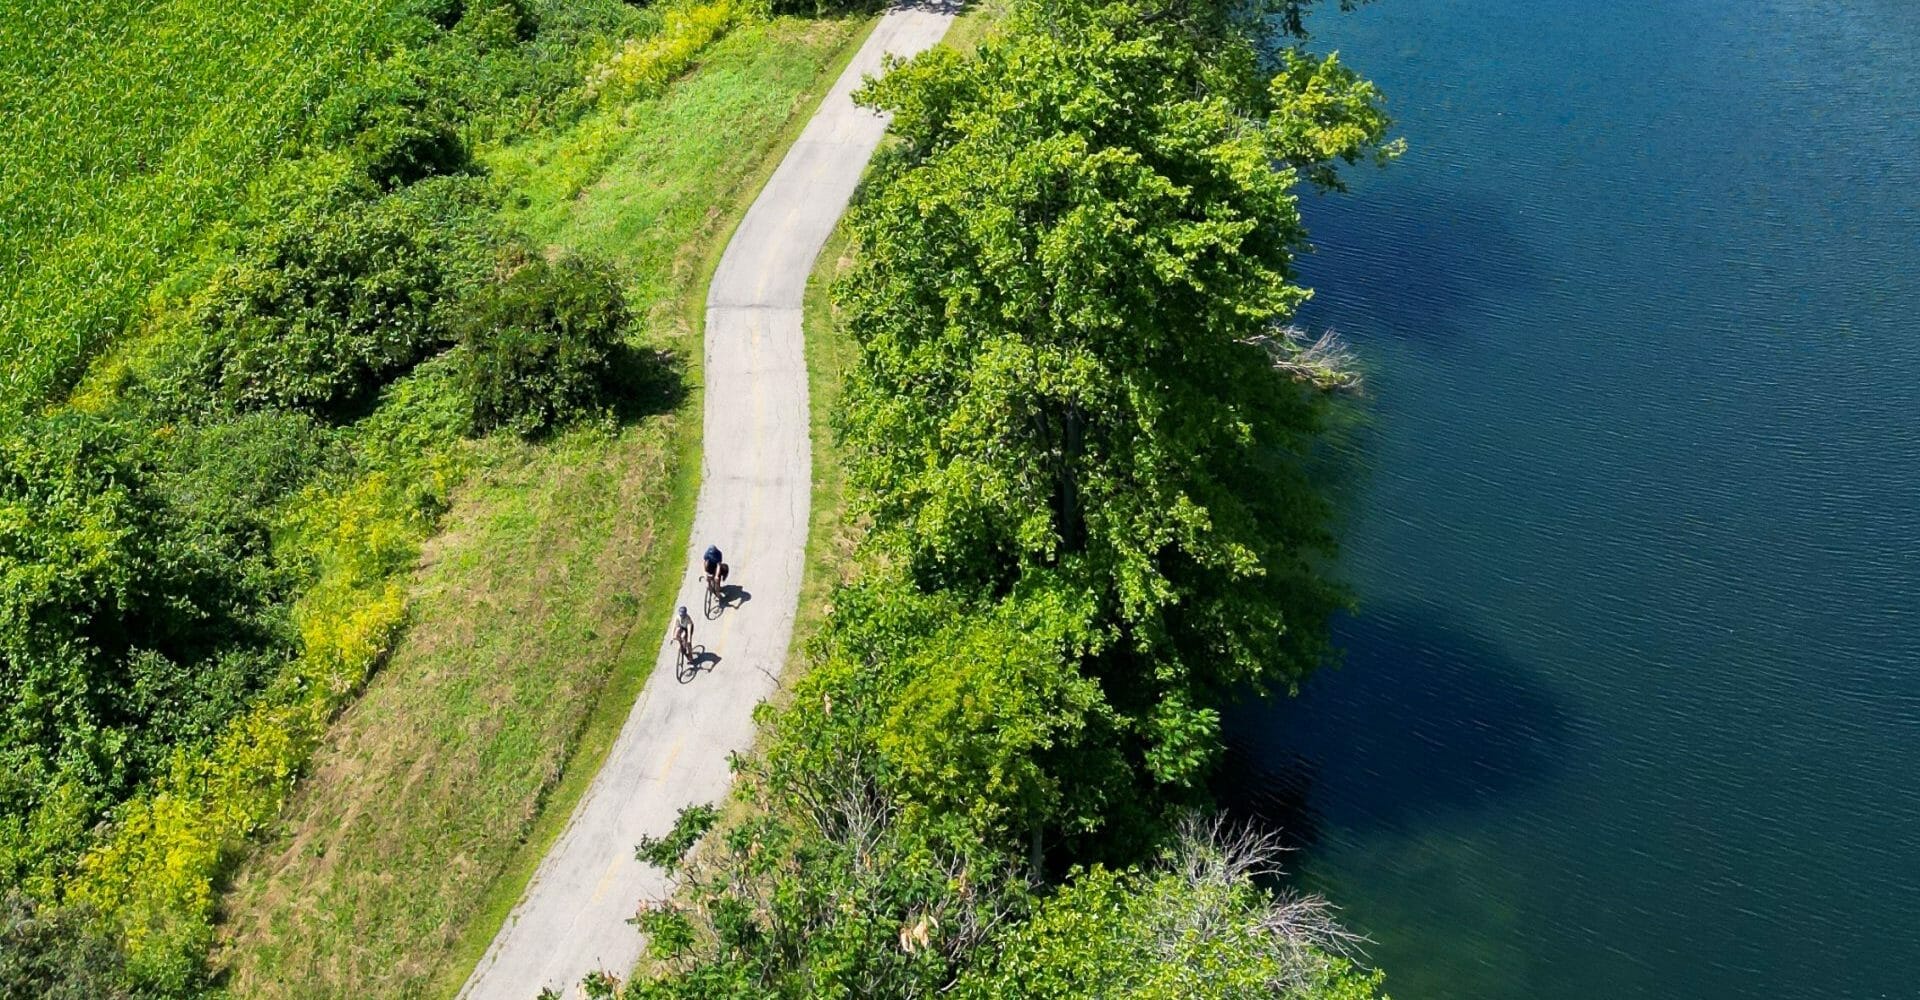 Discover Vaudreuil-Soulanges by bike